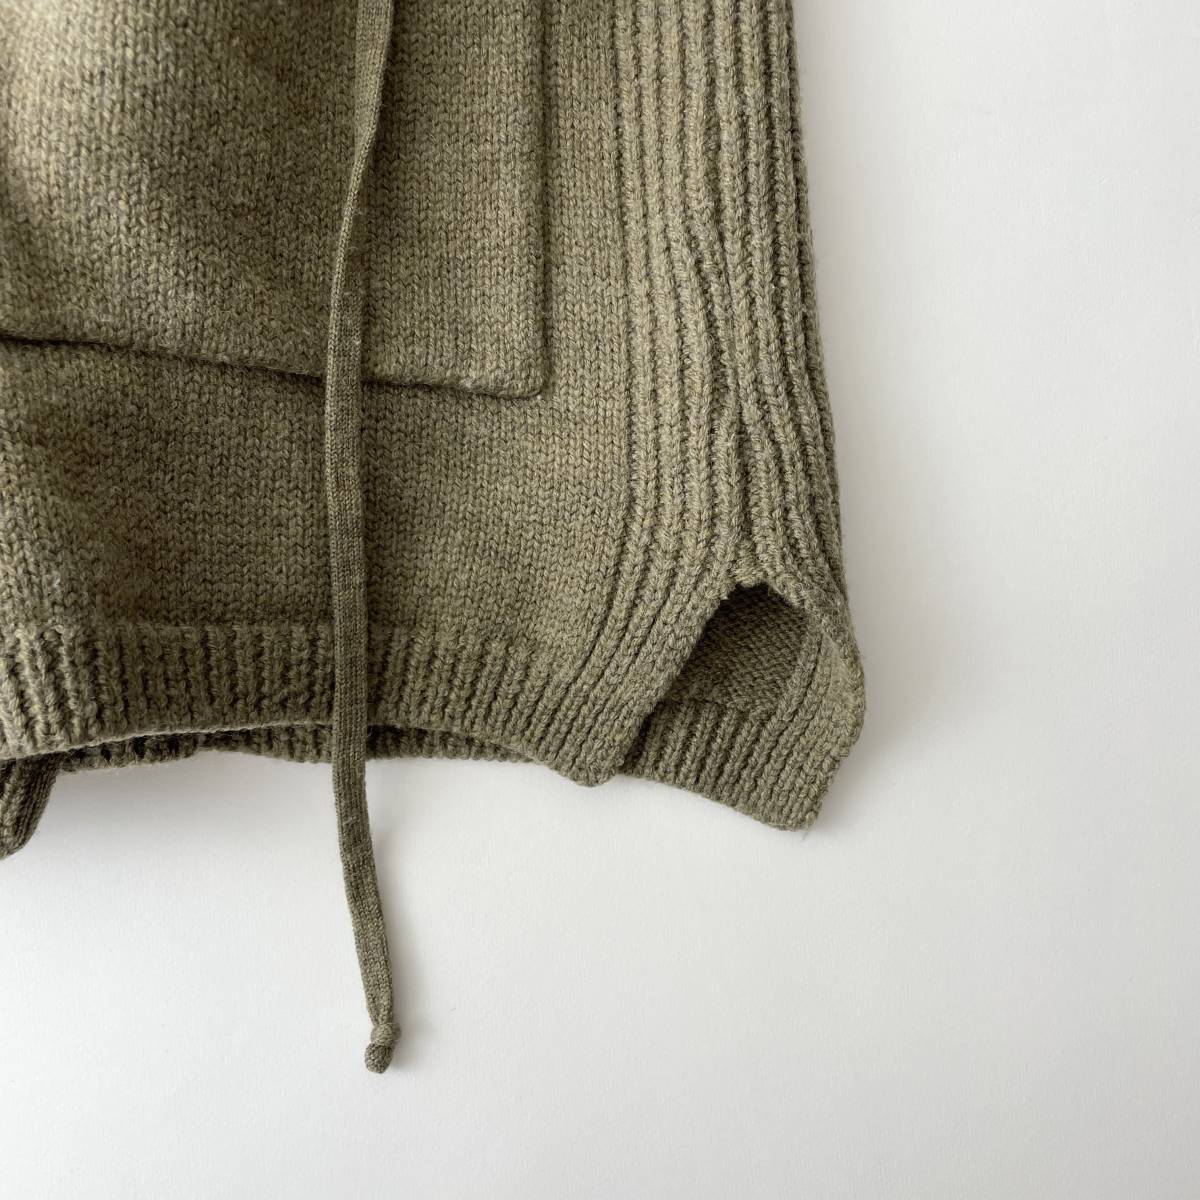 NONNATIVE size/1 (jb) Nonnative wool knitted jacket cardigan sweater outer no color beige JAPAN knit